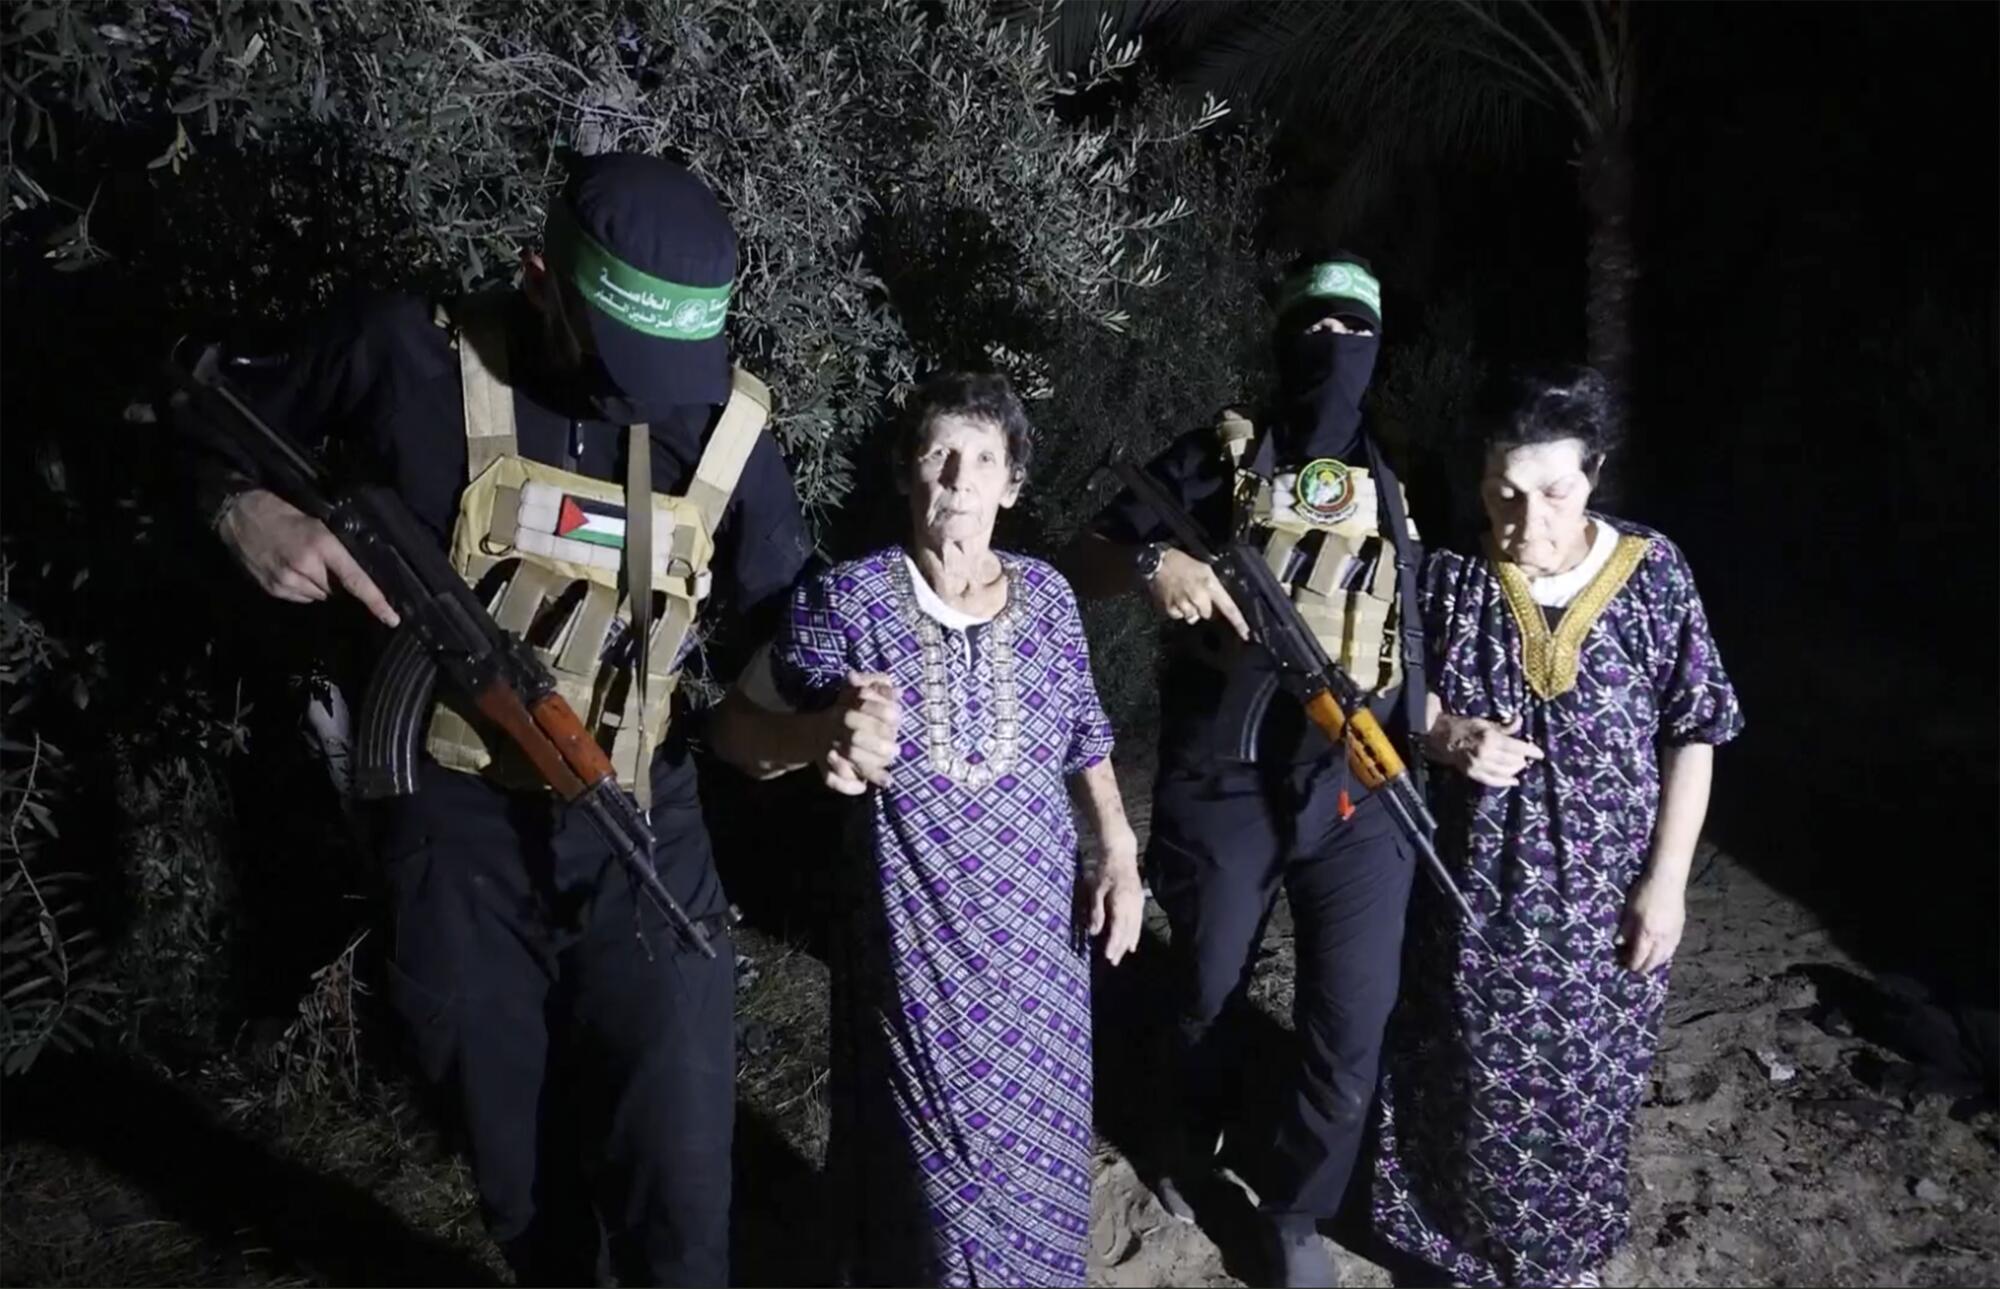 Two older women are escorted by Hamas militants to be released to the Red Cross.